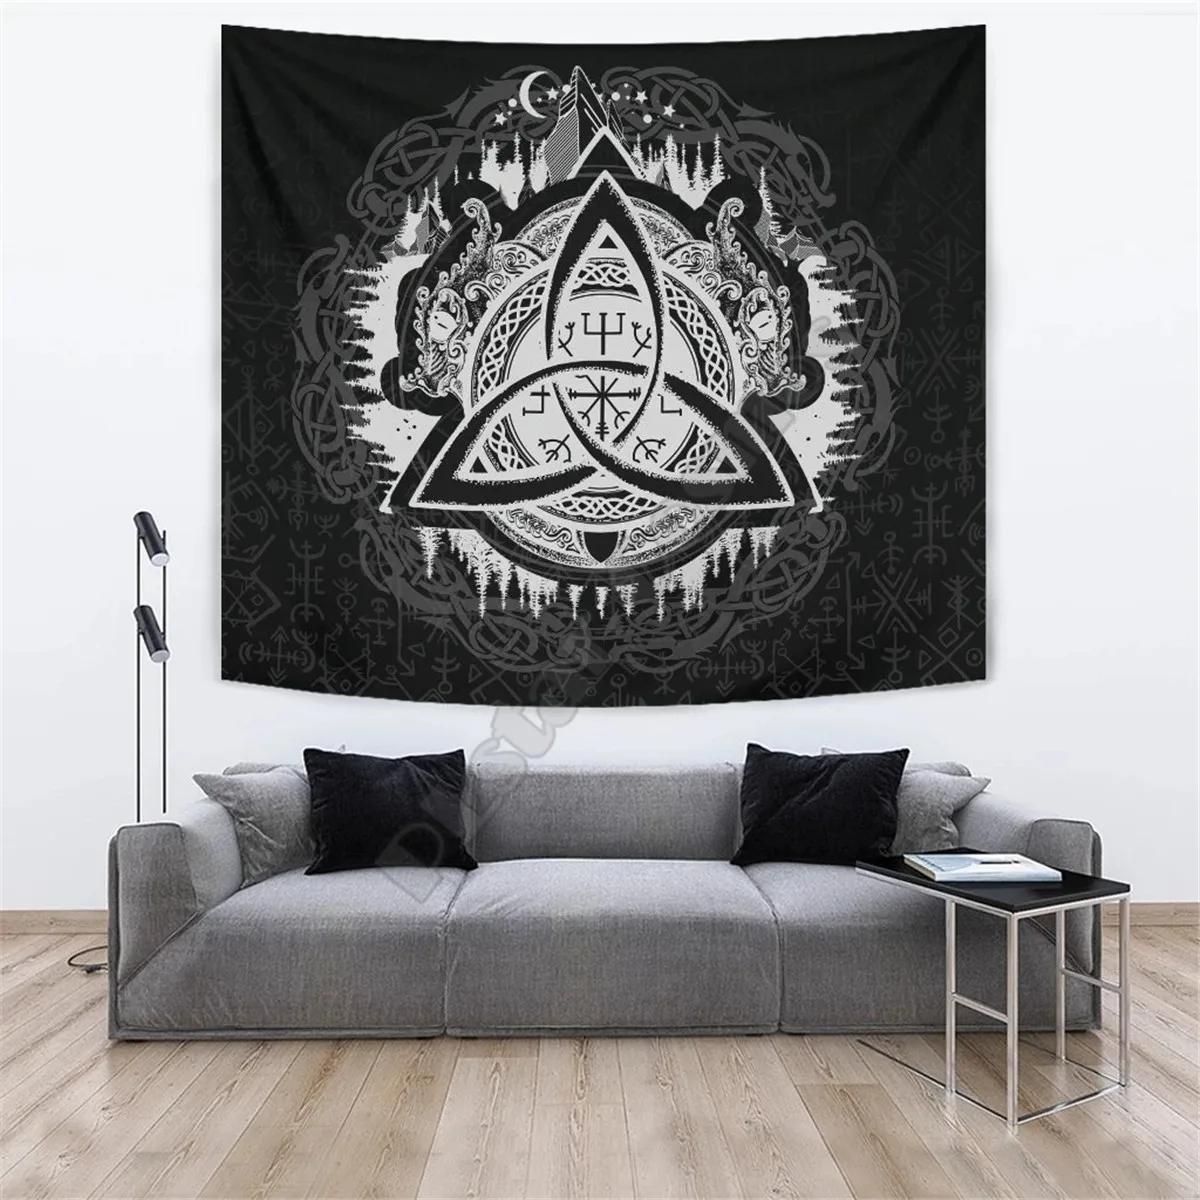 Viking Style Tapestry Dragon Celtic 3D Print Wall Tapestry Rectangular Home Decor Wall Hanging Home Decoration wall hanging bruce lee kung fu dragon tapestry